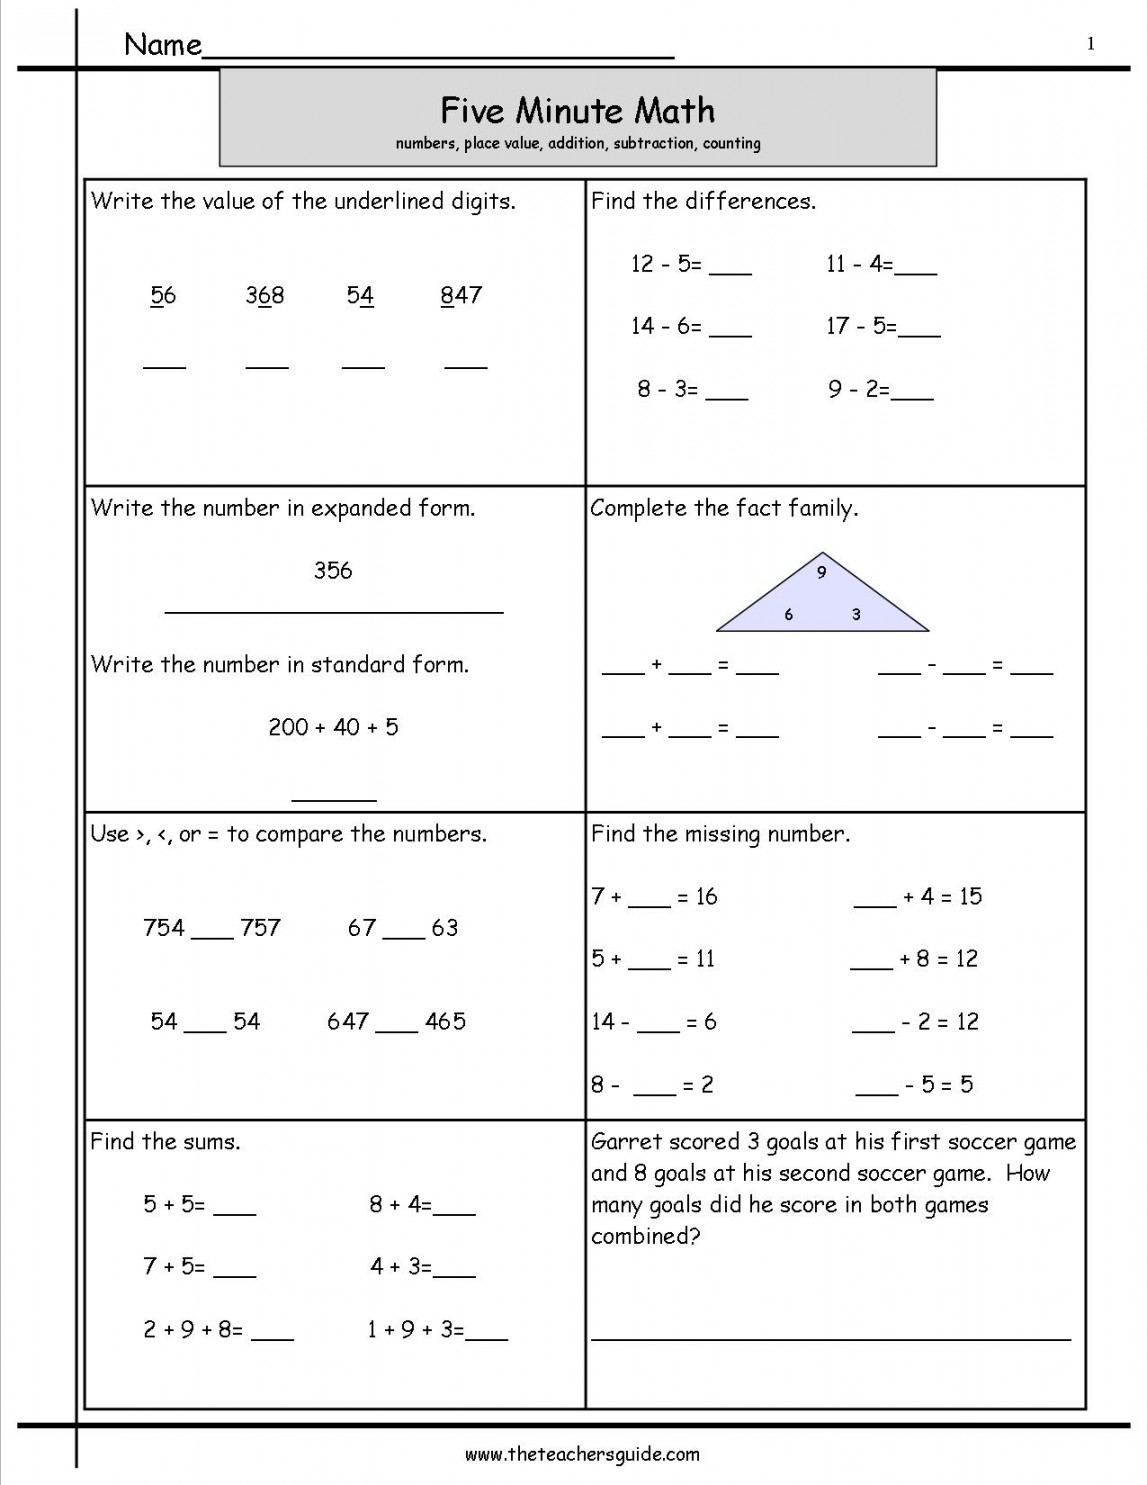 Five Minute Math Review Worksheets from The Teacher